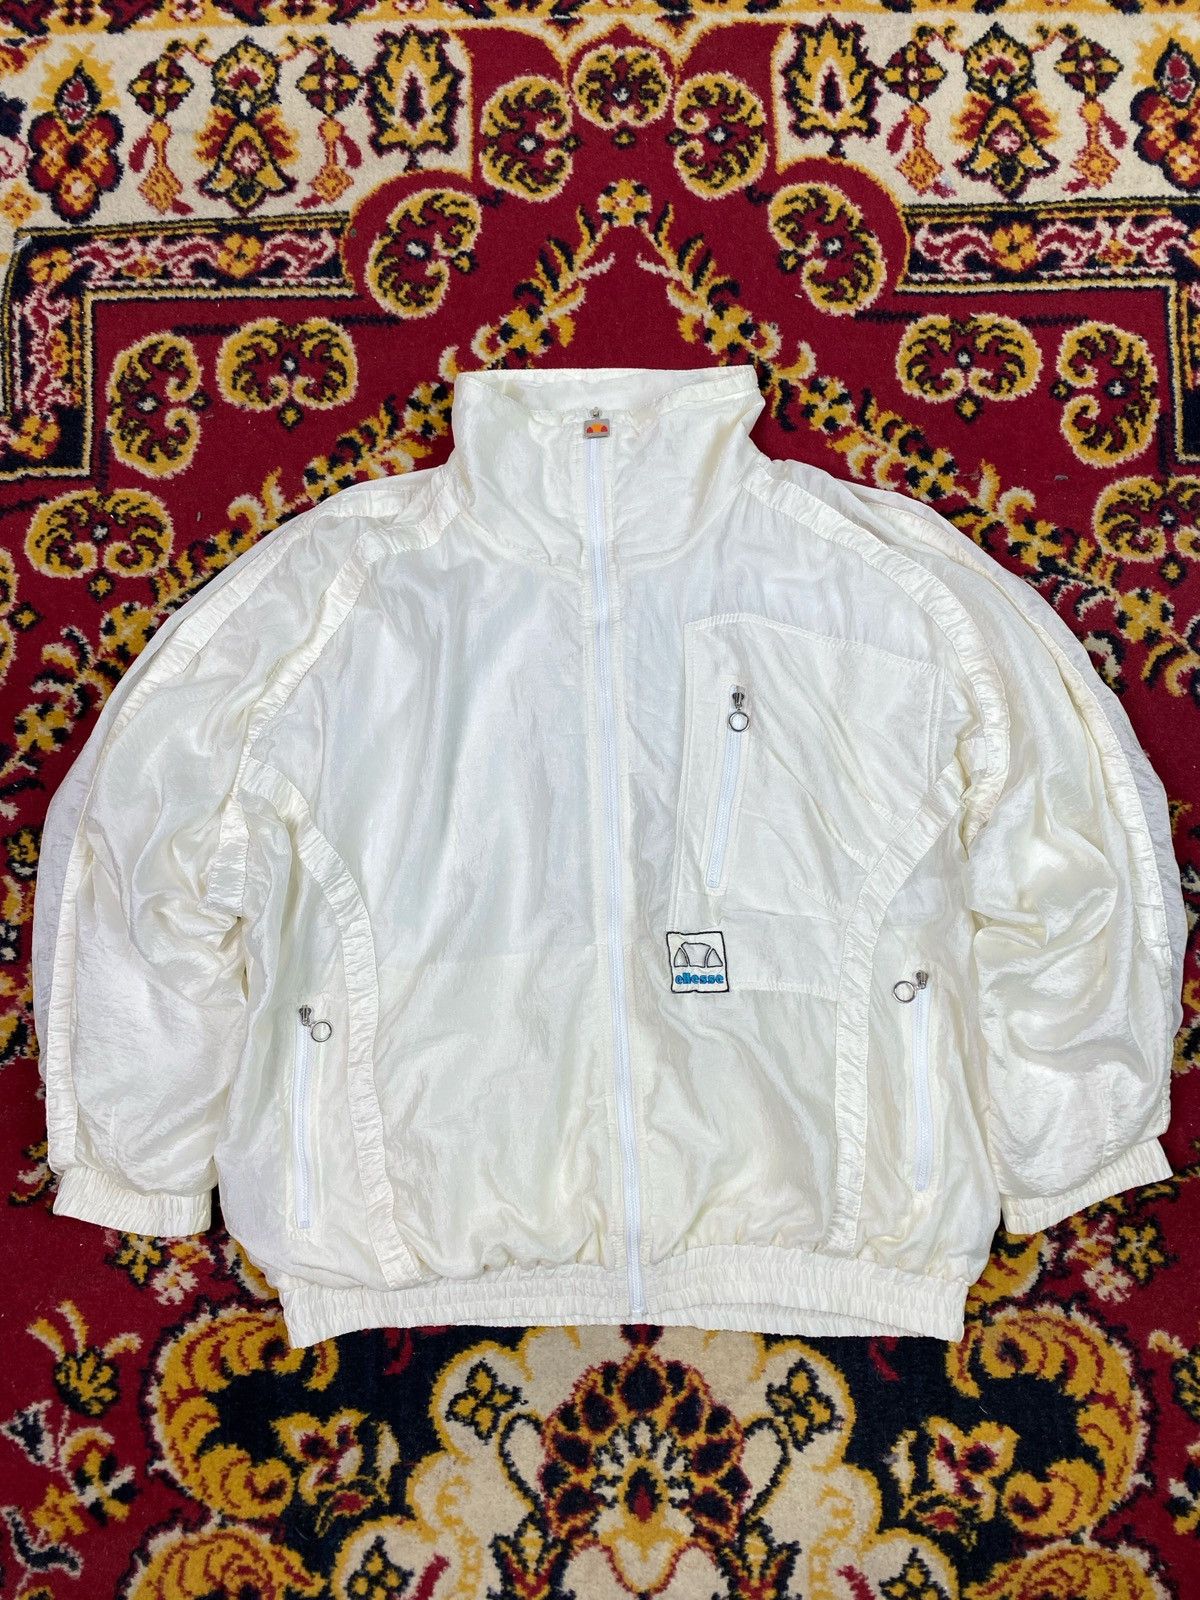 Vintage Vintage Ellesse Made in Italy Parachute Shiny Jacket Zip Top Size US M / EU 48-50 / 2 - 1 Preview